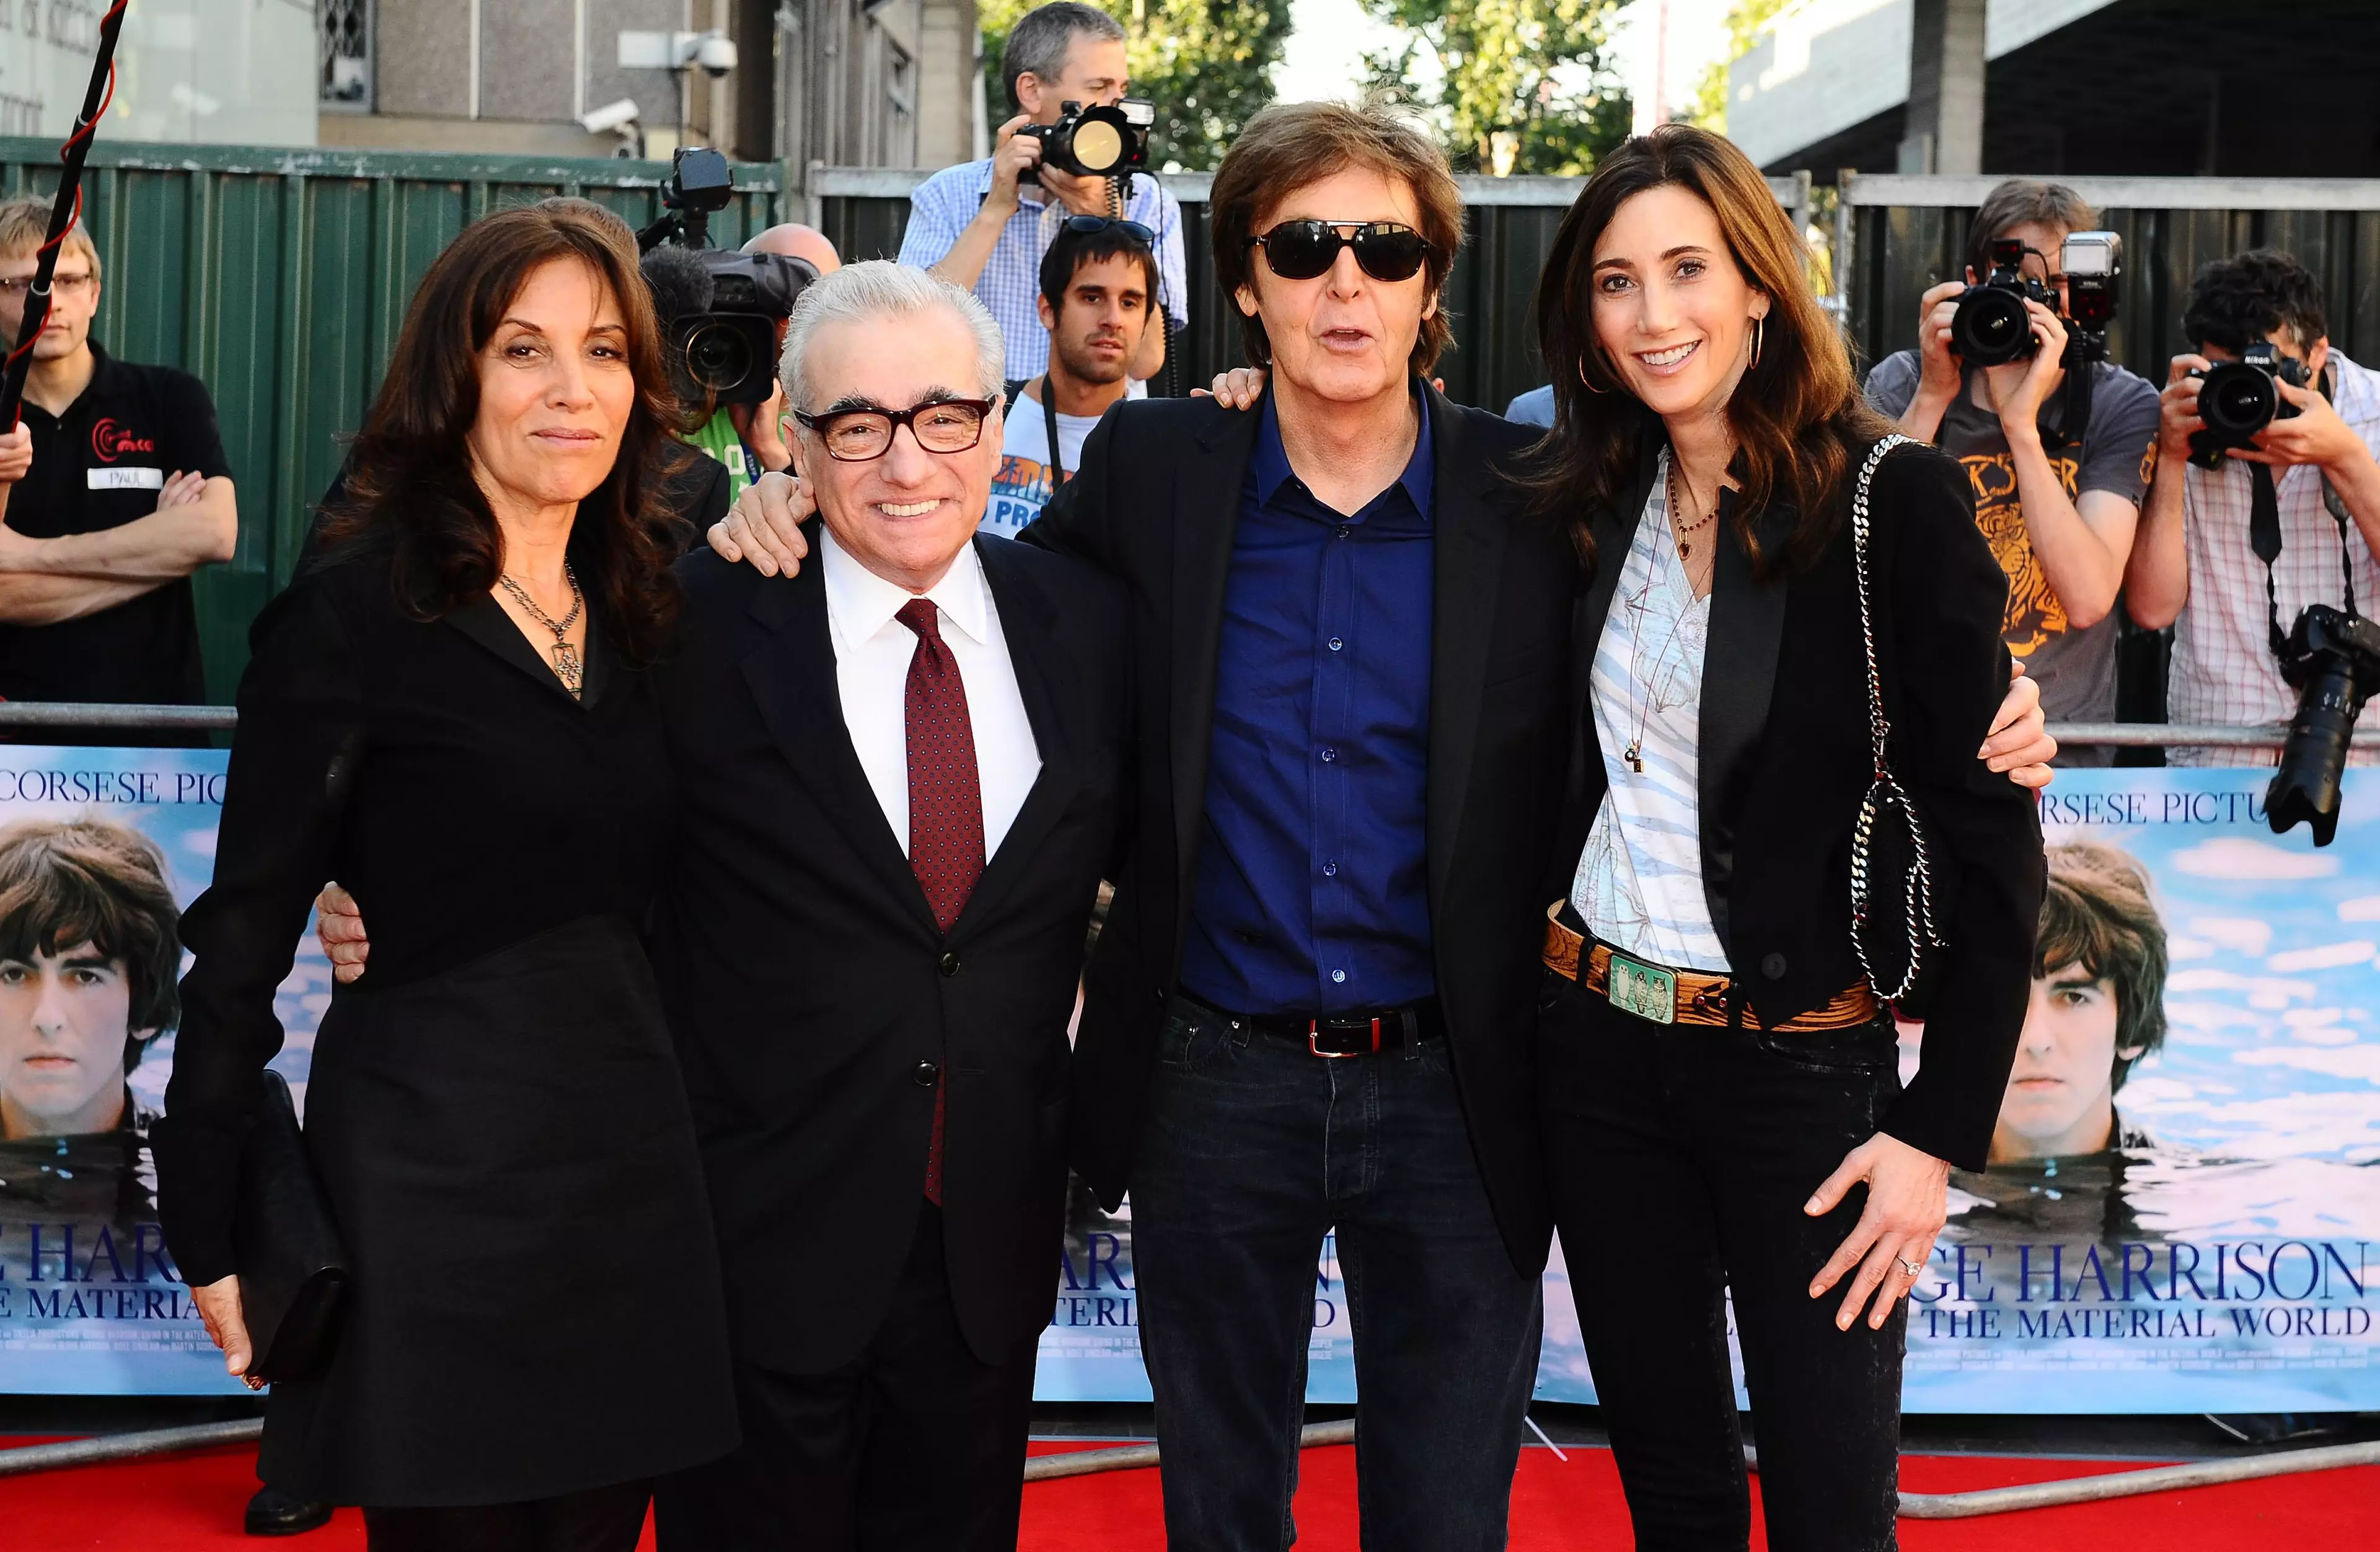 Olivia Harrison, Martin Scorsese, Sir Paul Mccartney and Nancy Shevell at the premiere of George Harrison: Living In The Material World.